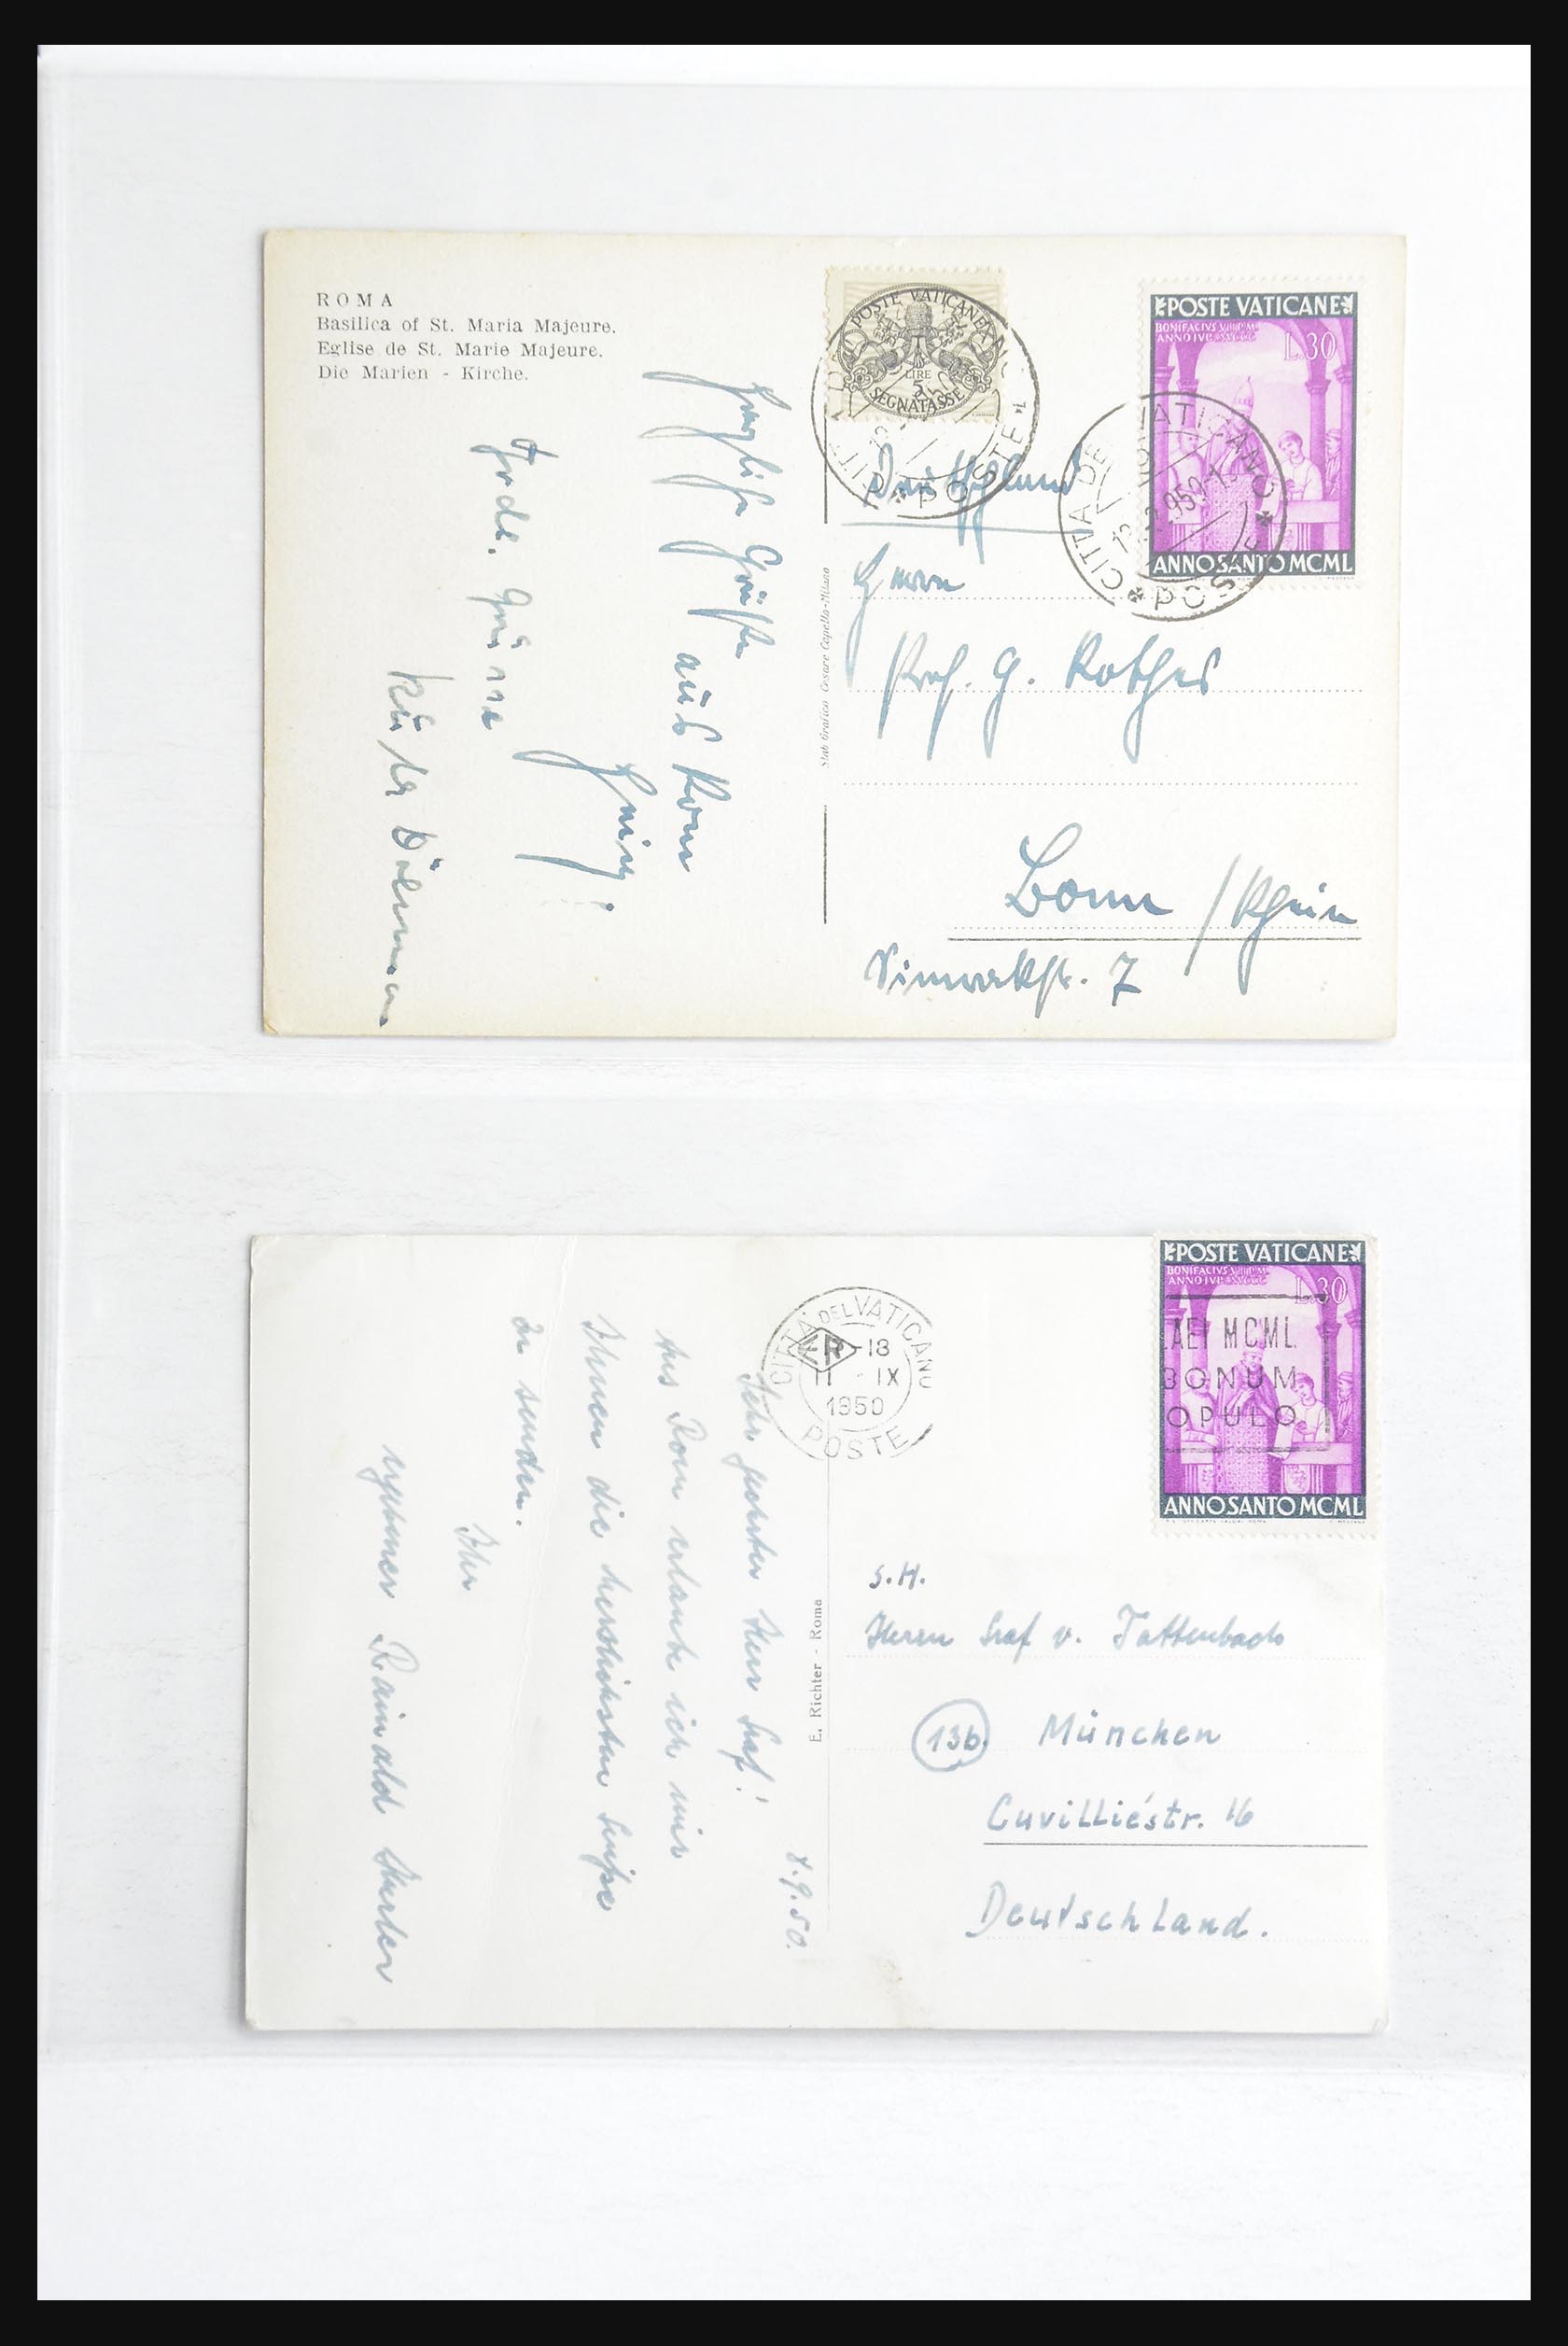 32252 6507 - 32252 Italy and territories covers 1850-1960.